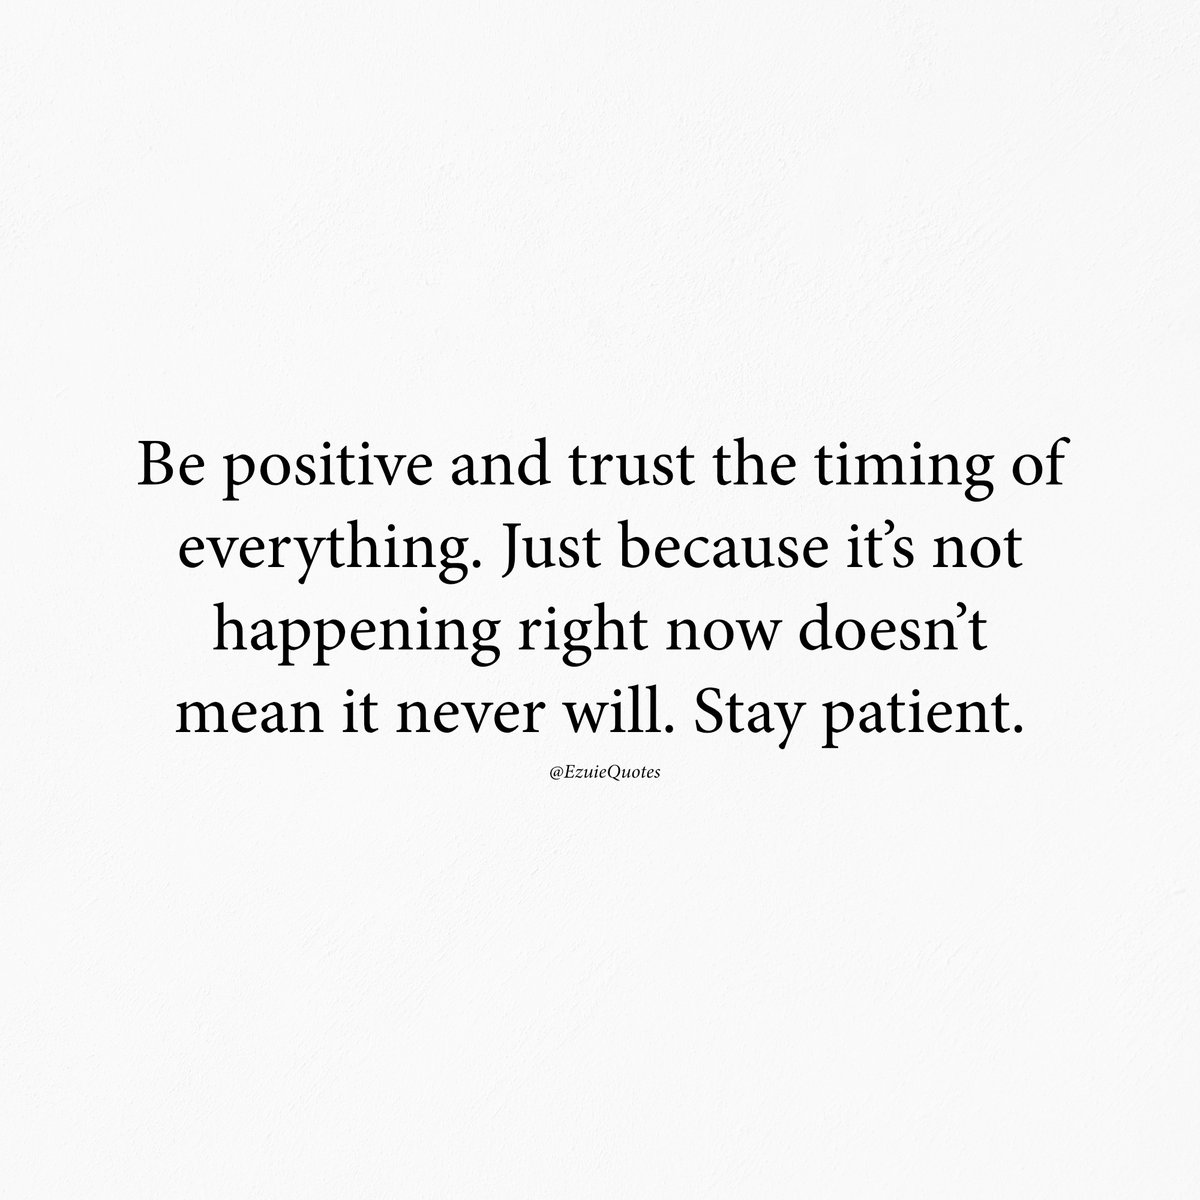 Stay patient